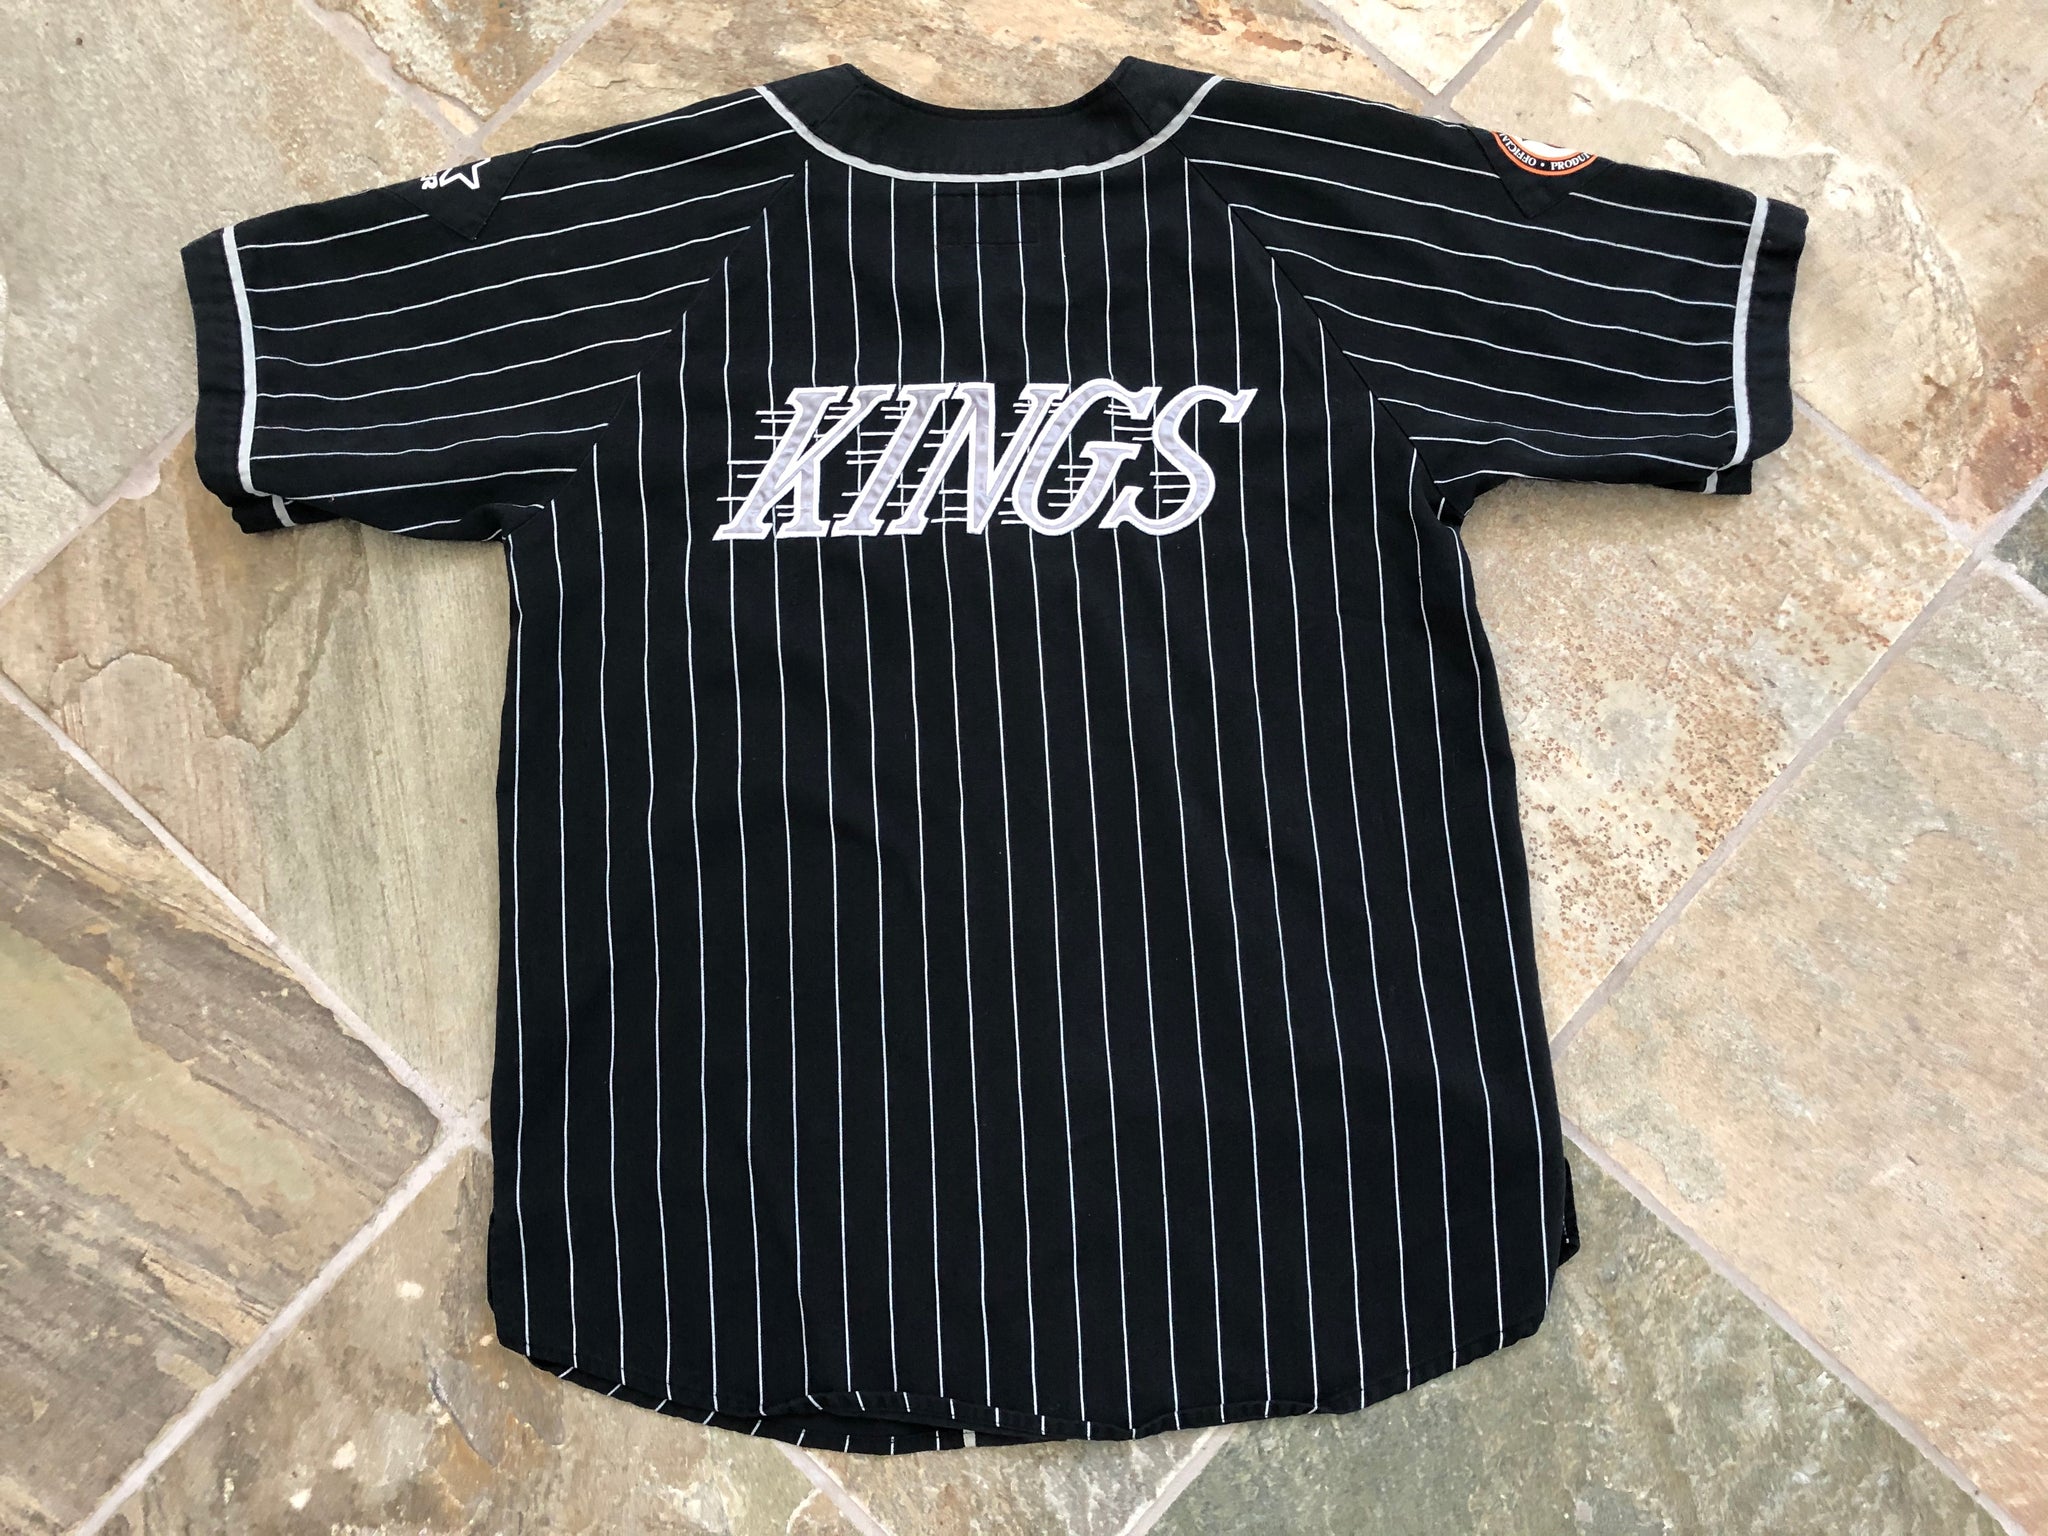 Vintage 1970's SPRINGFIELD KINGS No. 26 (LG) Jersey Sweater